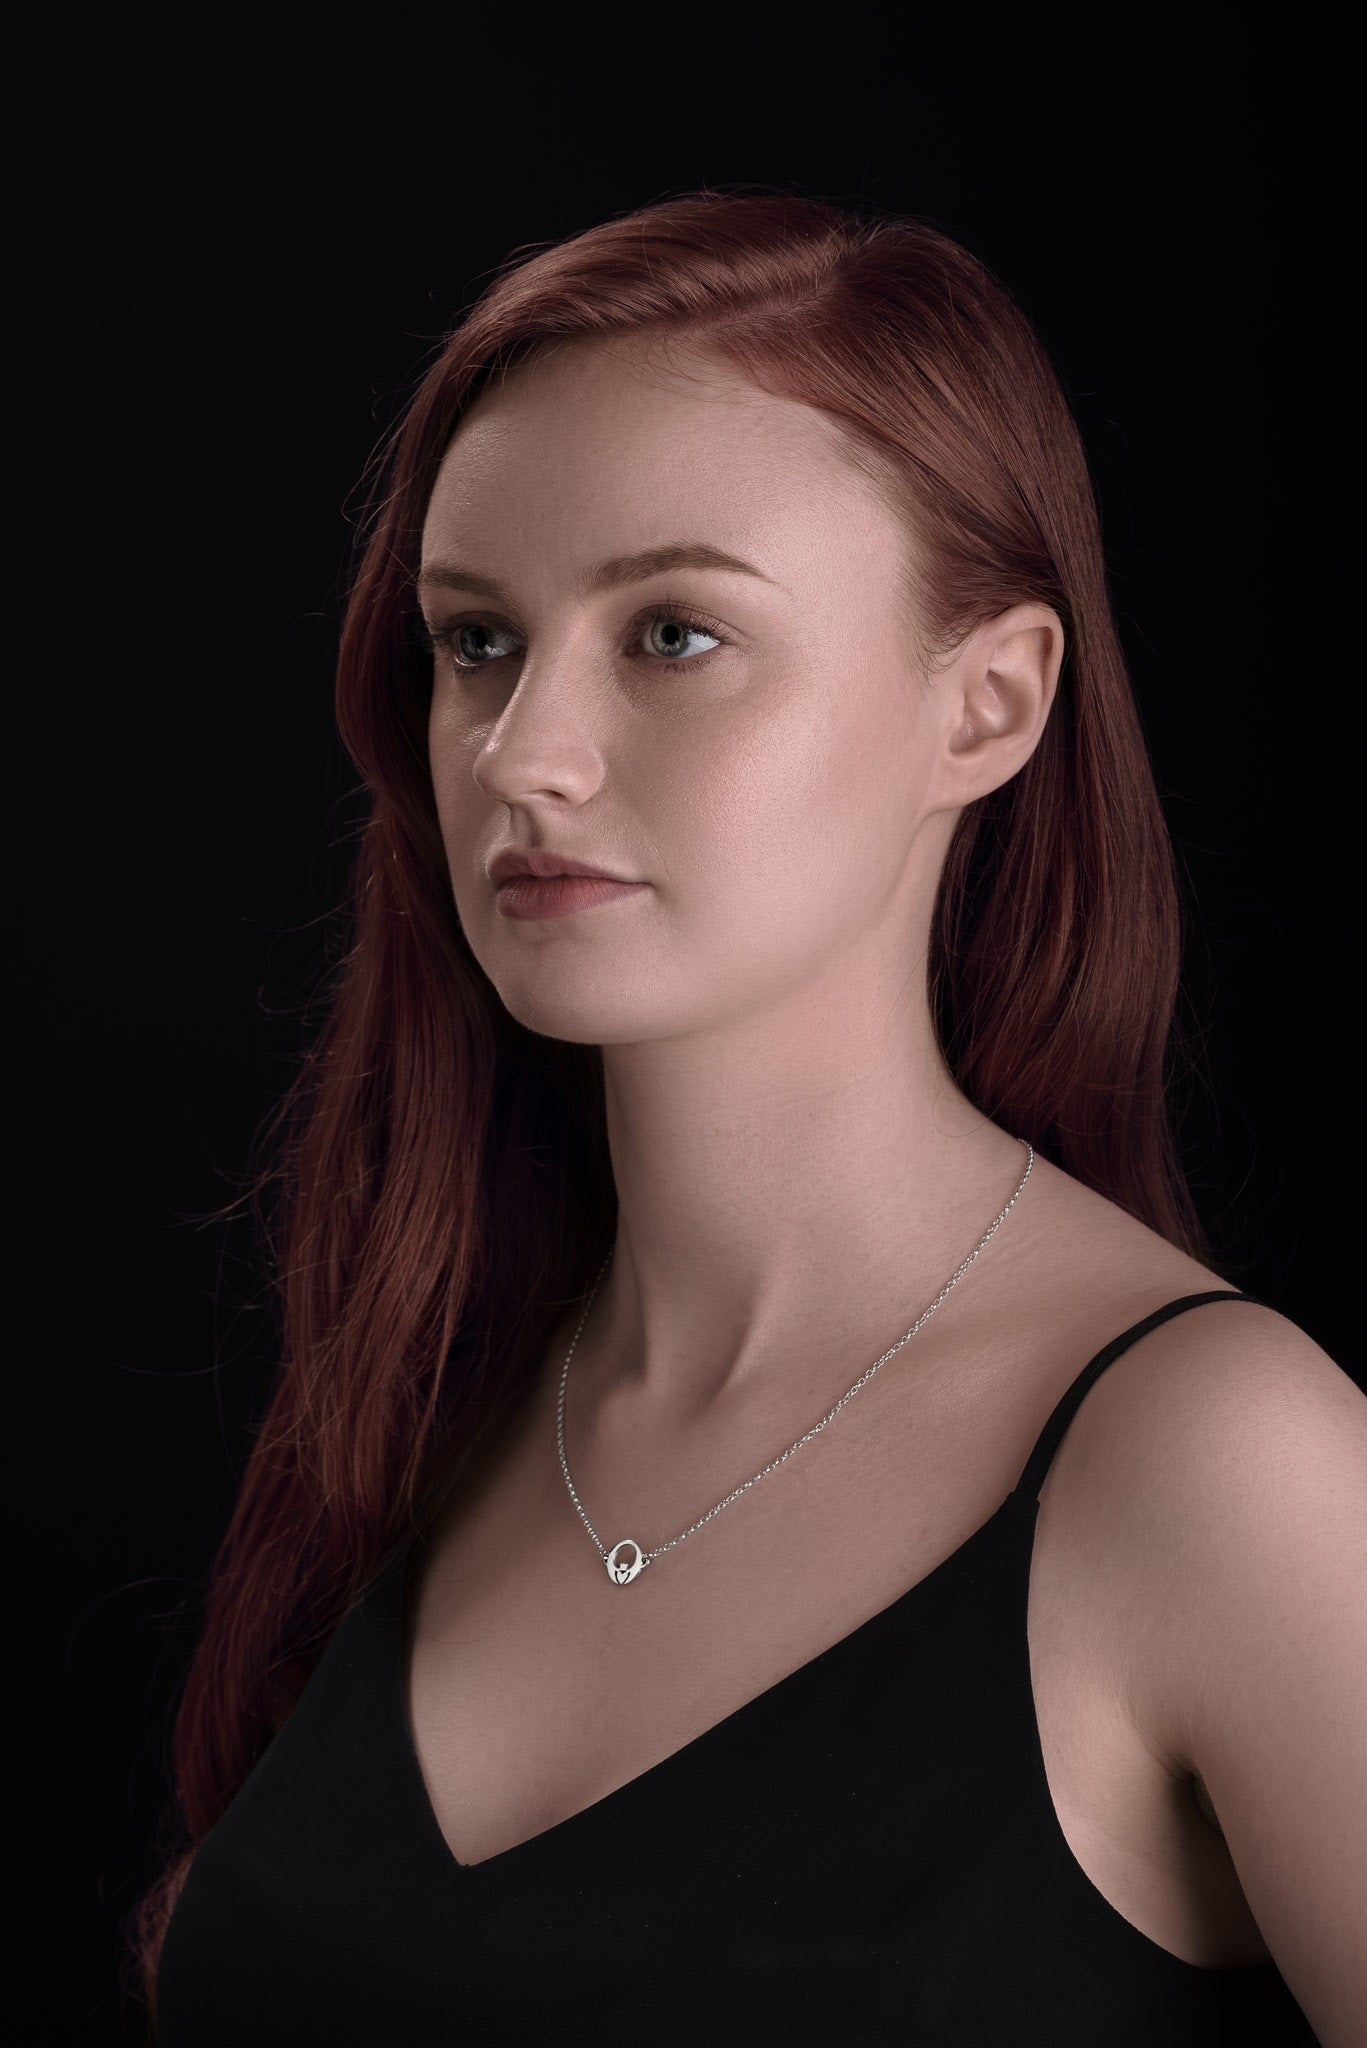 Claddagh necklace on a model